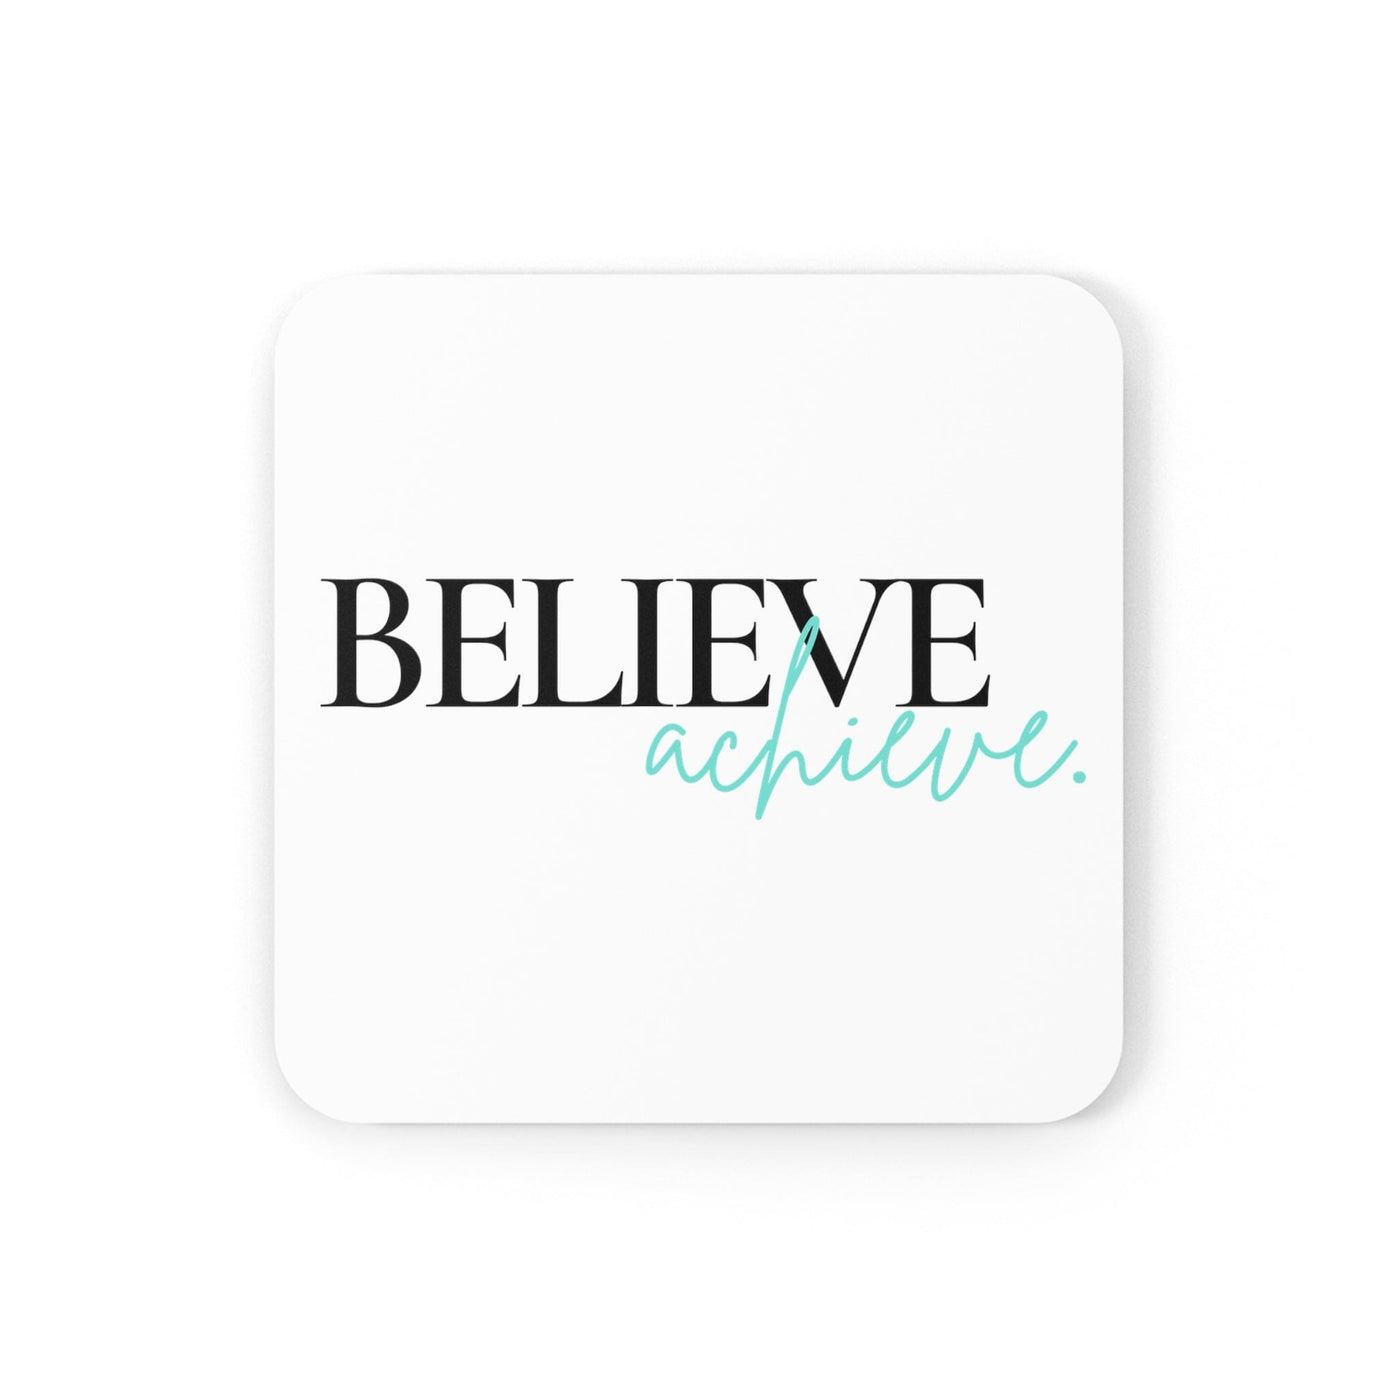 Handcrafted Square Coaster Set Of 4 For Drinks And Cups Believe Achieve